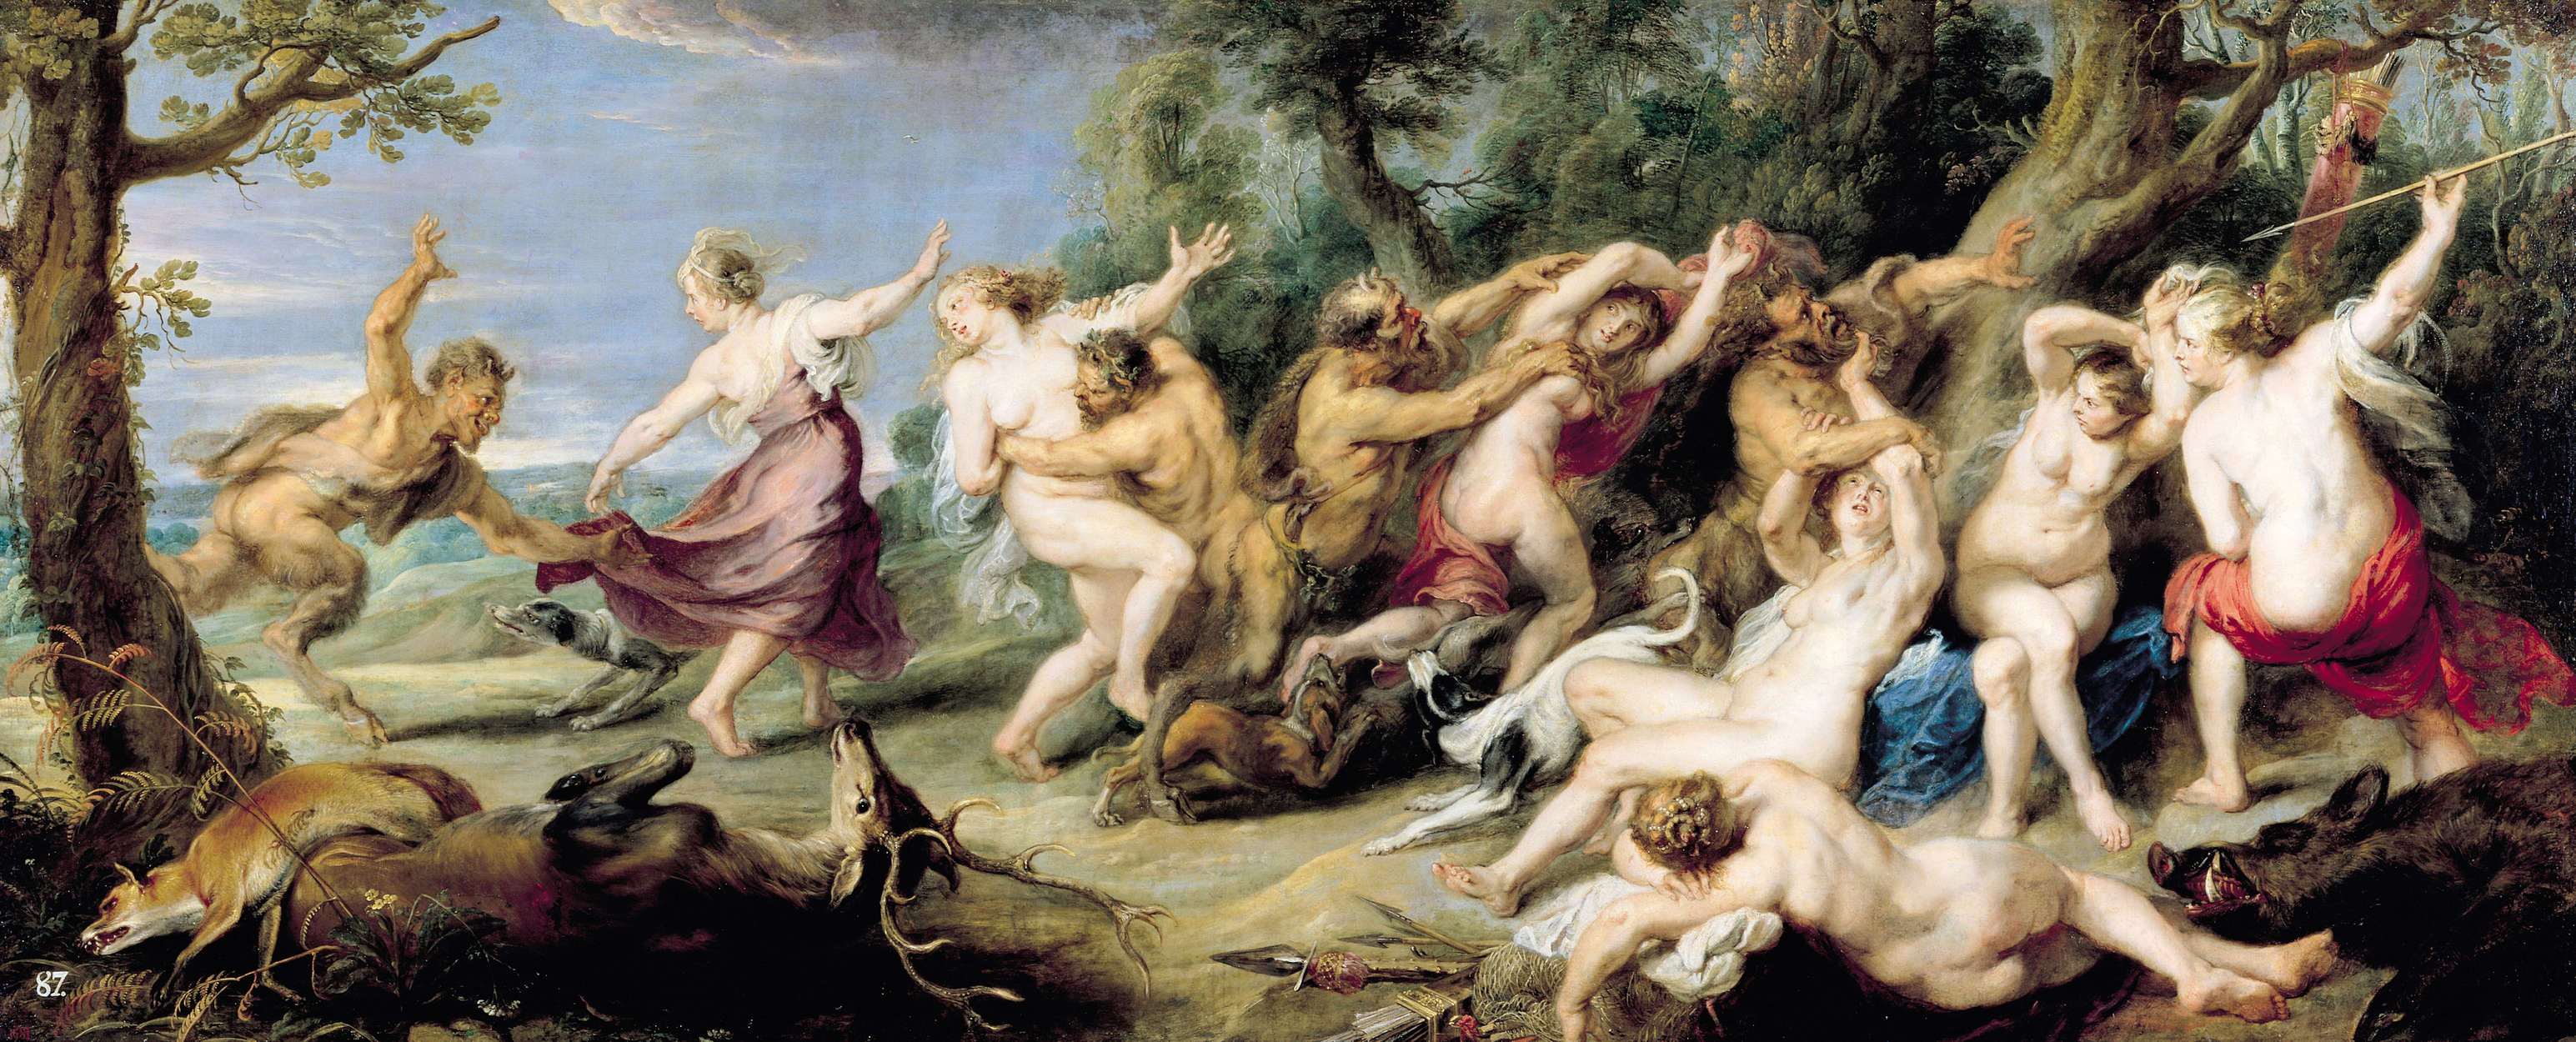             Photo wallpaper "Diana and her nymphs on the hunt" by Peter Paul Rubens
        